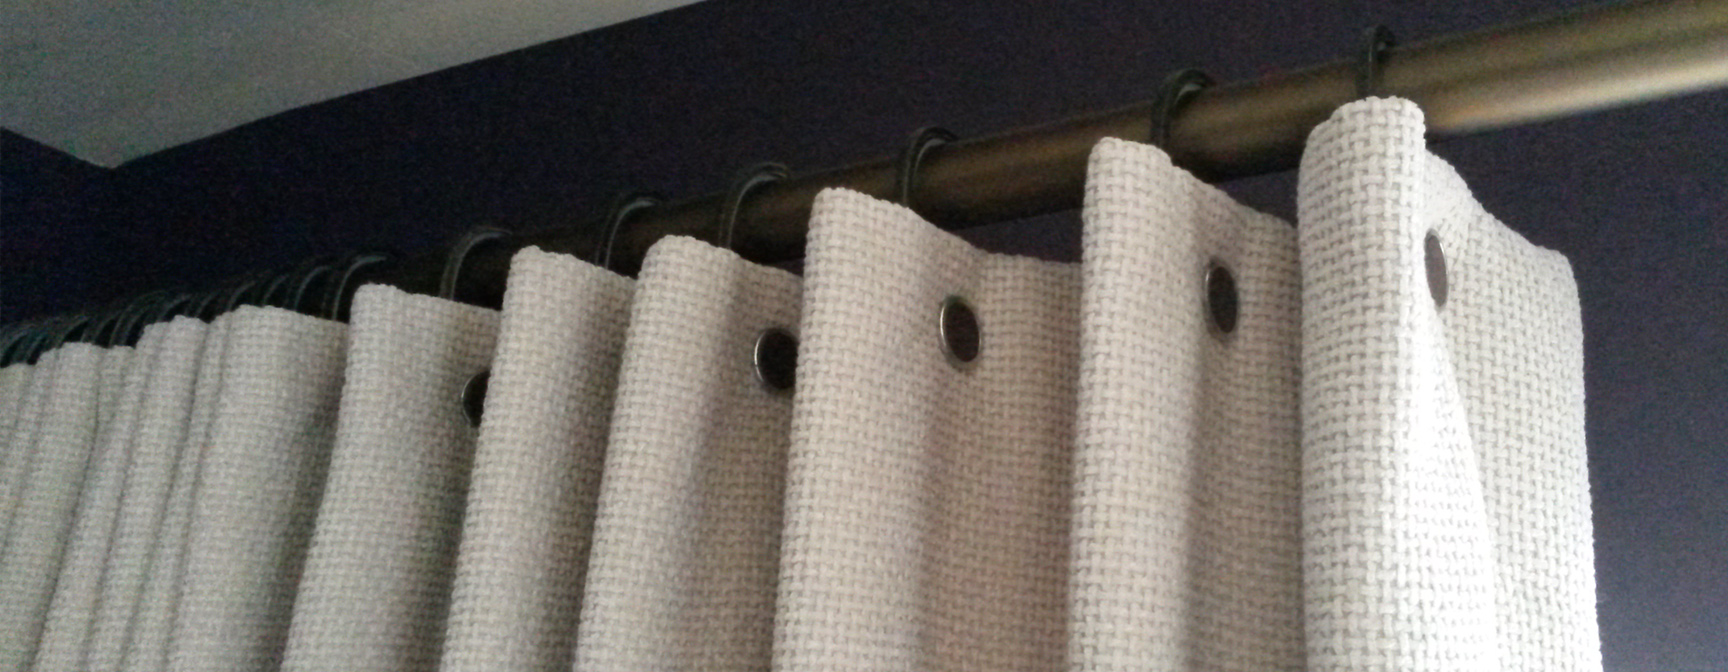 Walcot House pleating rings and rivets used on interlined curtains - Oxford